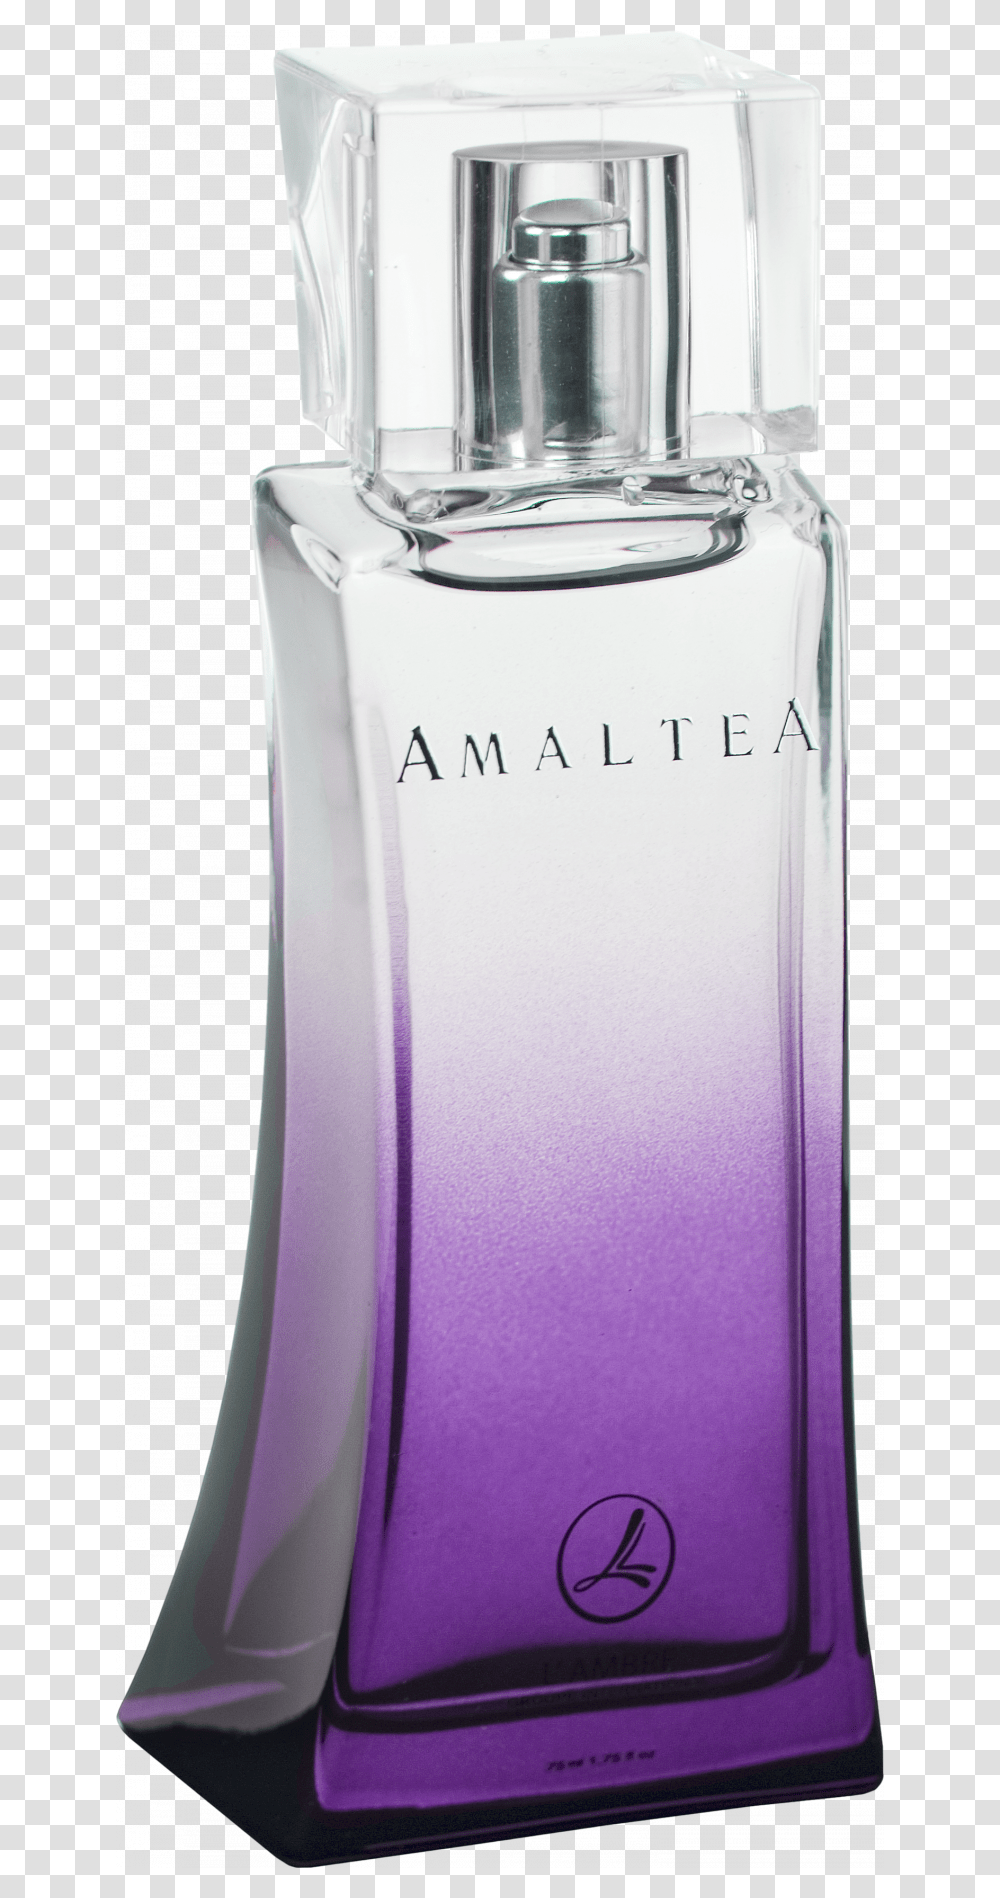 Now You Can Download Perfume Image Purple Perfume, Bottle, Cosmetics, Refrigerator, Appliance Transparent Png